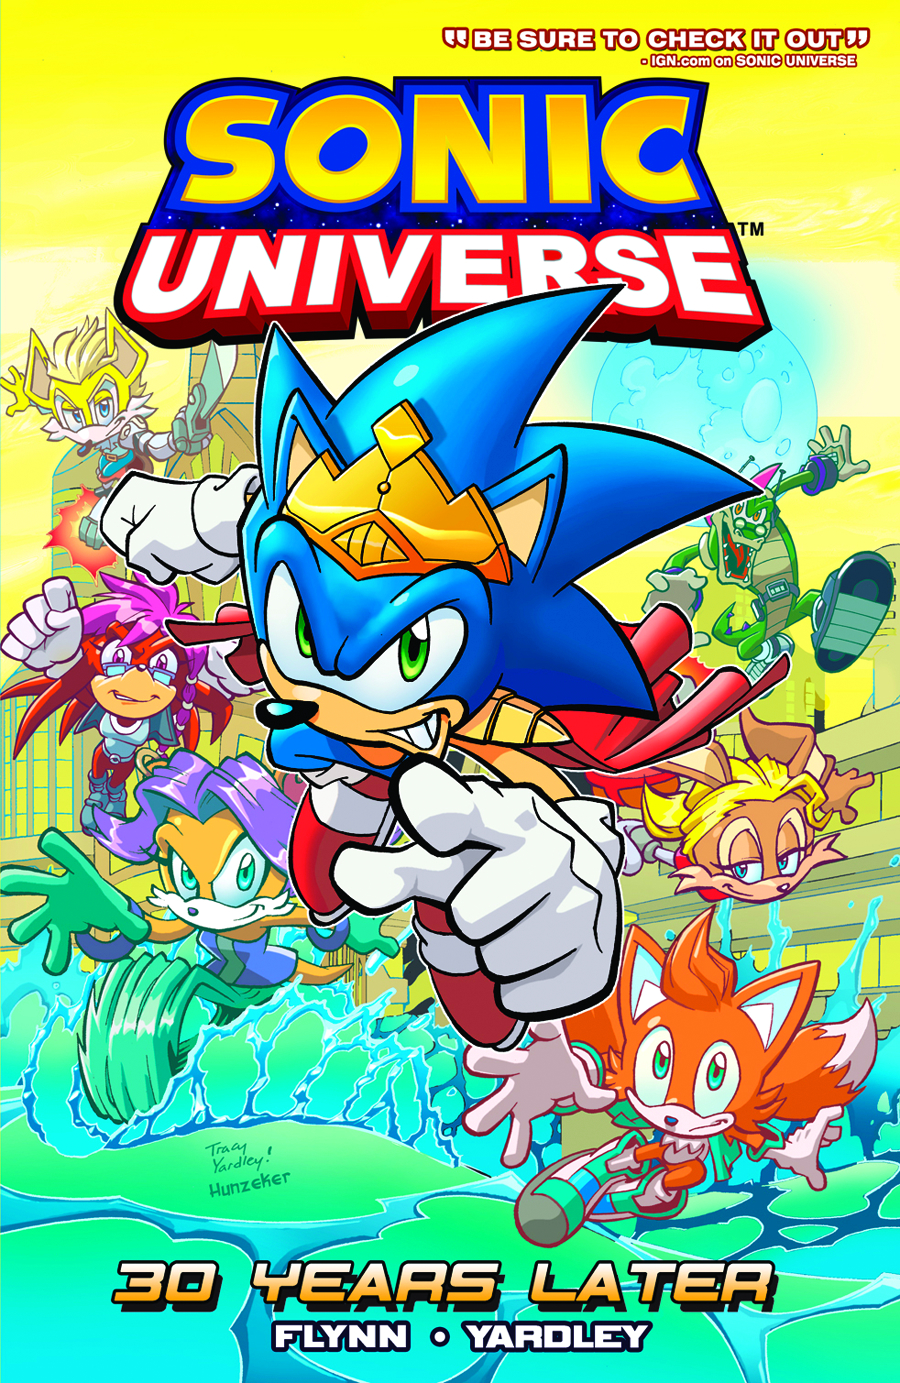 Sonic universe tp vol 02 30 years later (NOV110737) .